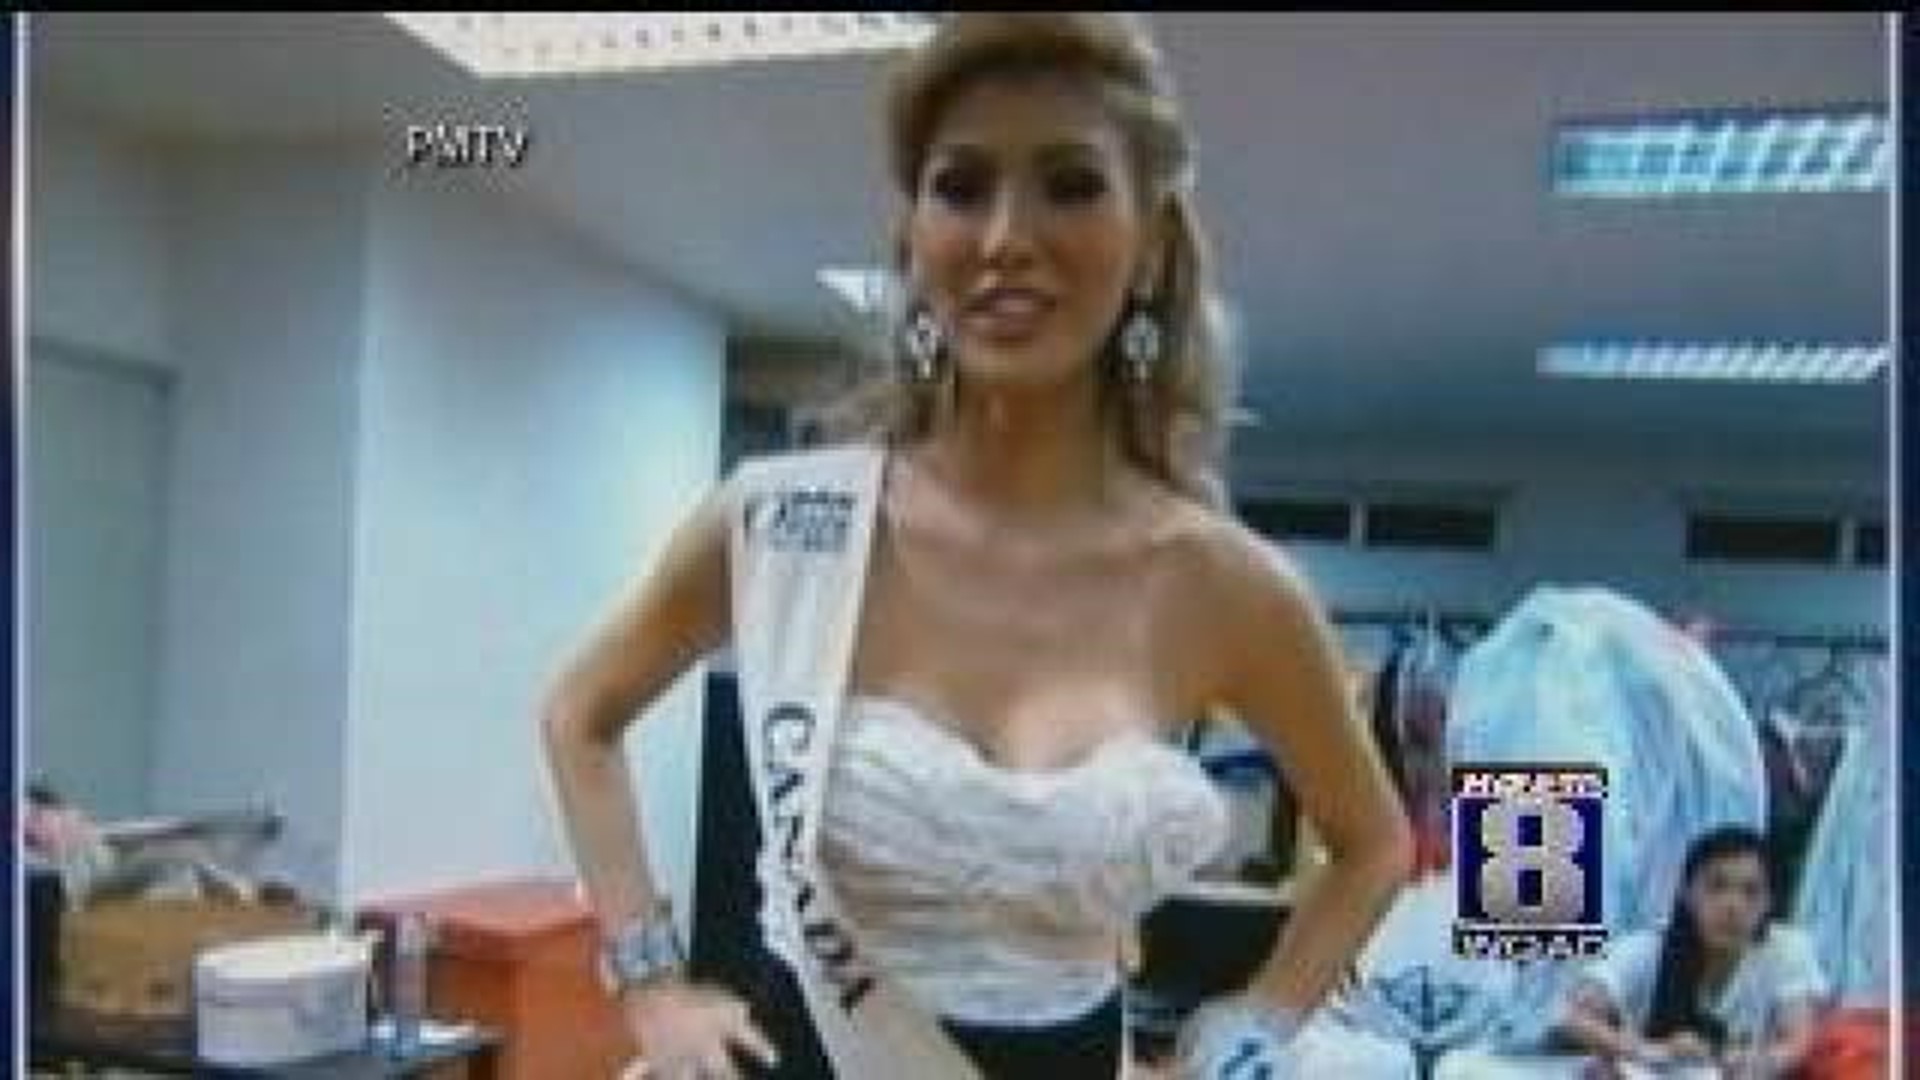 Transgender woman now allowed to compete in Miss Universe